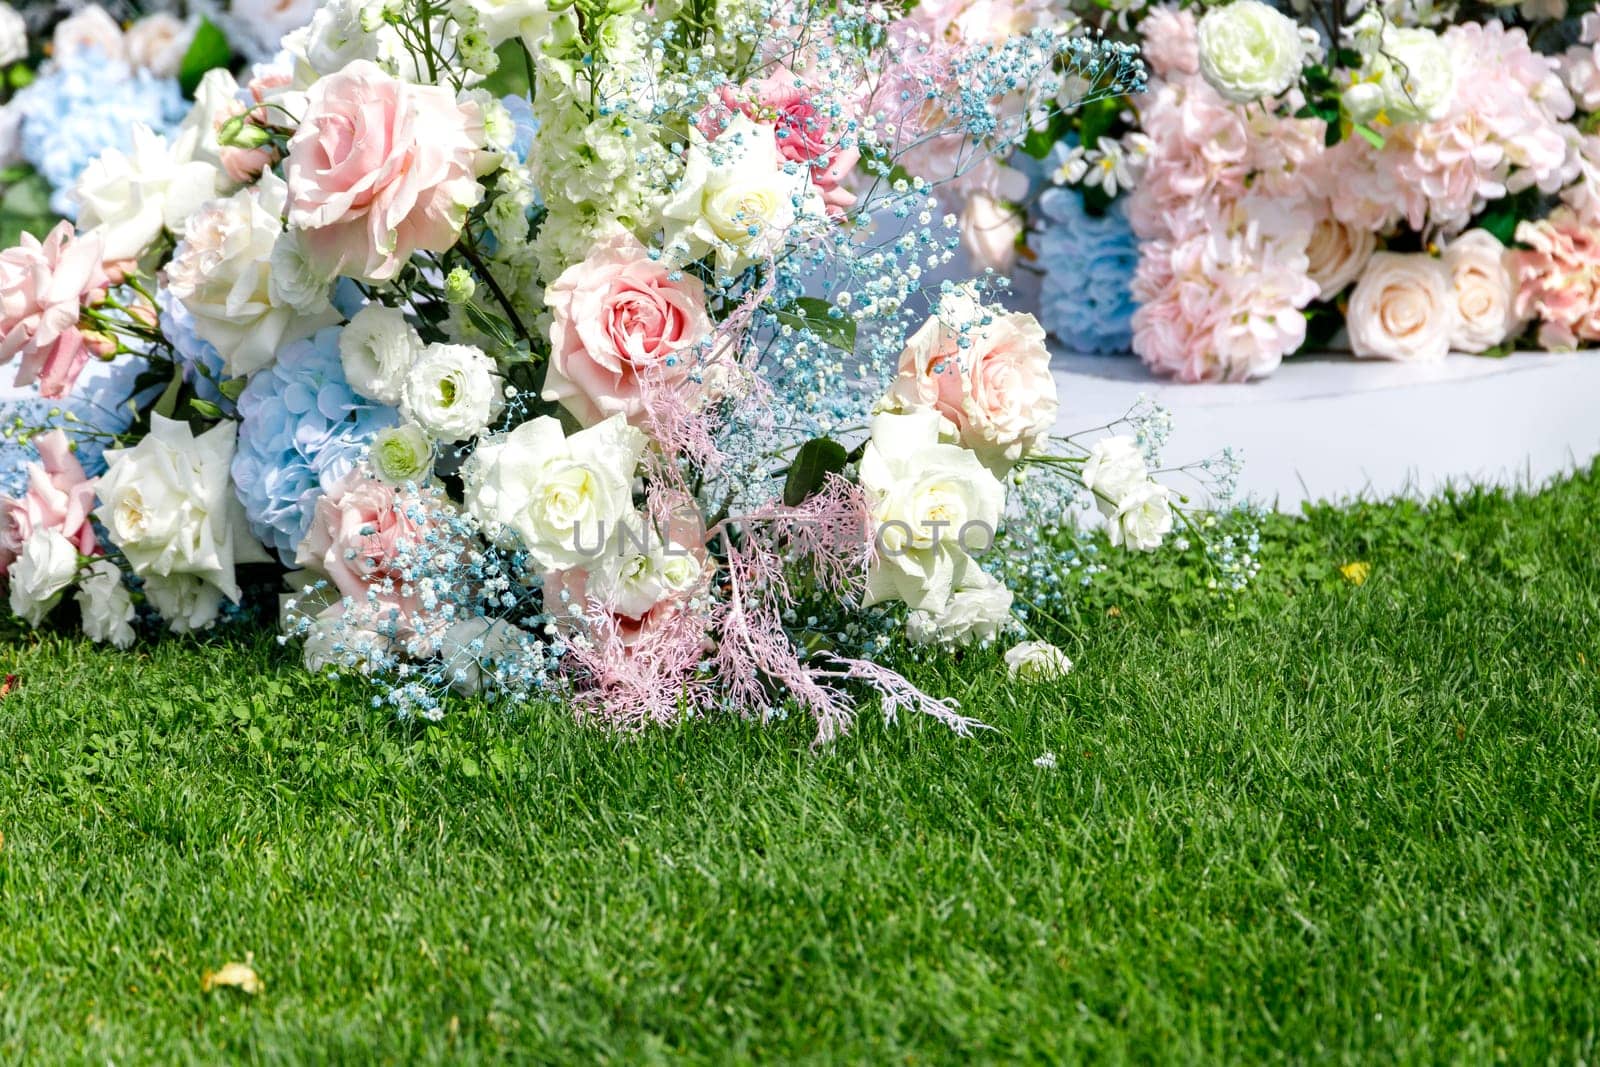 Green summer lawn and part of festive wedding flower decorations, copy space.